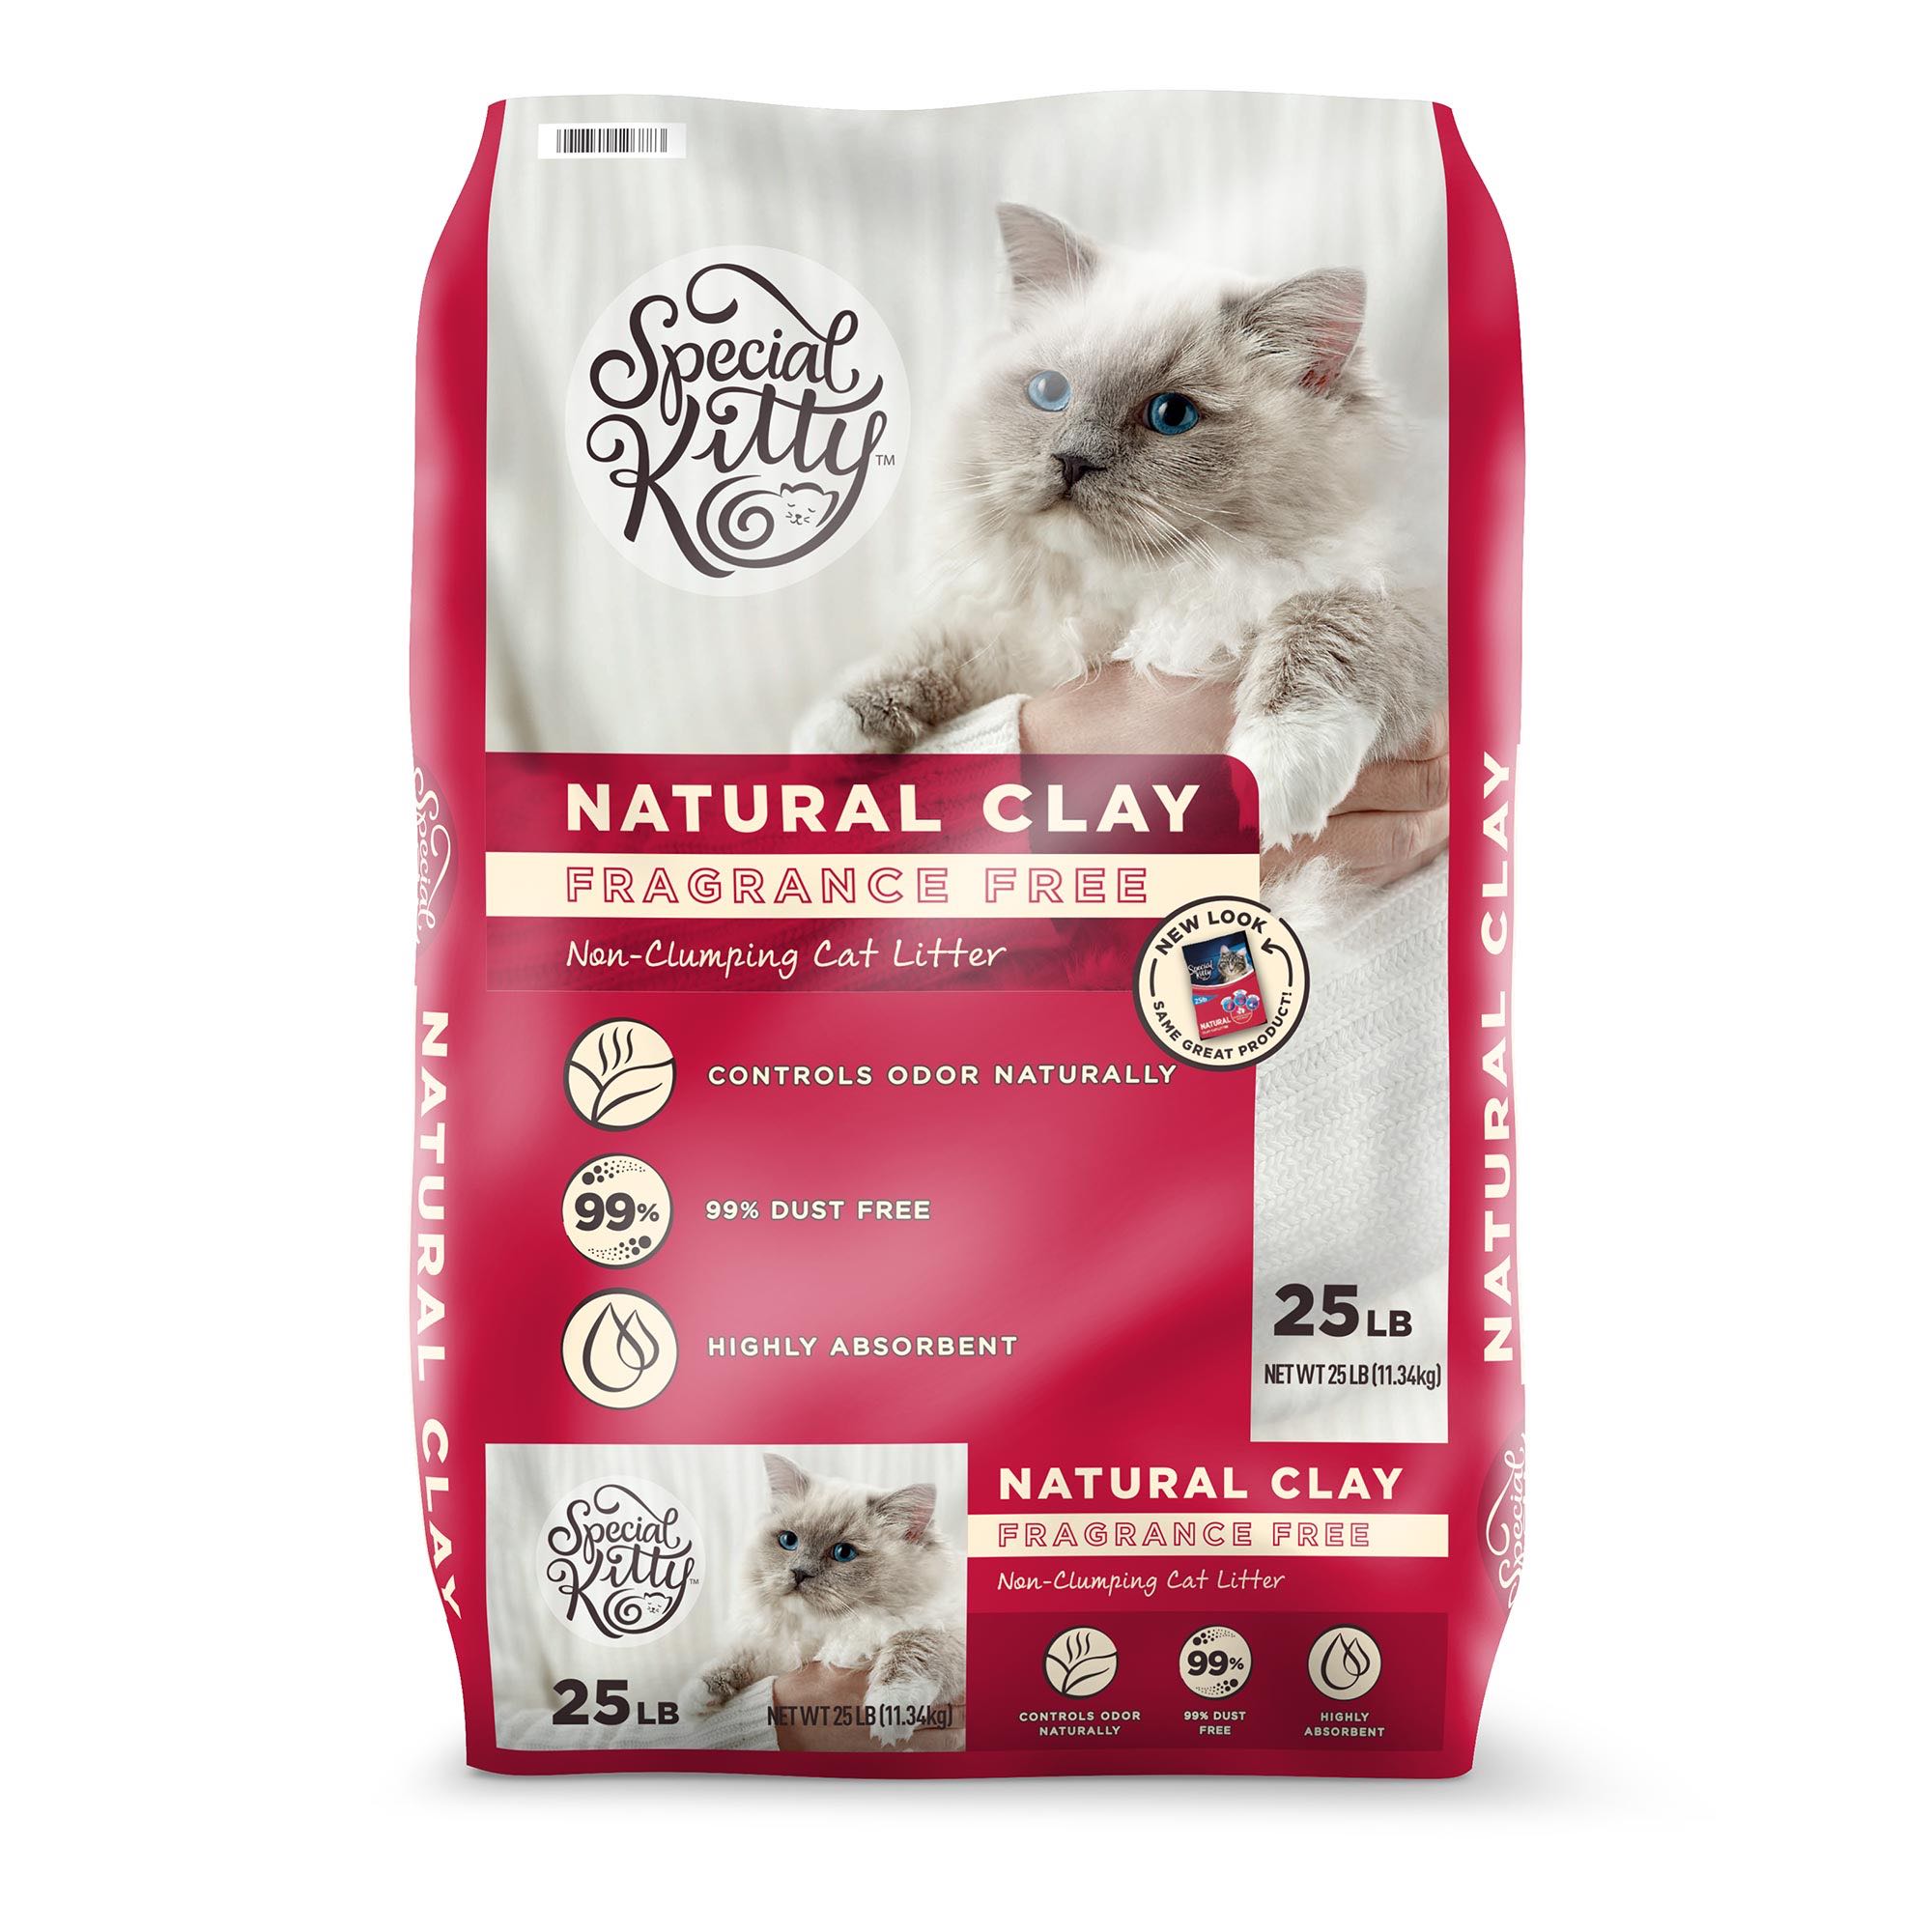 Special Kitty Fragrance Free Natural Clay Non-Clumping Cat Litter, 25 lb - image 4 of 10